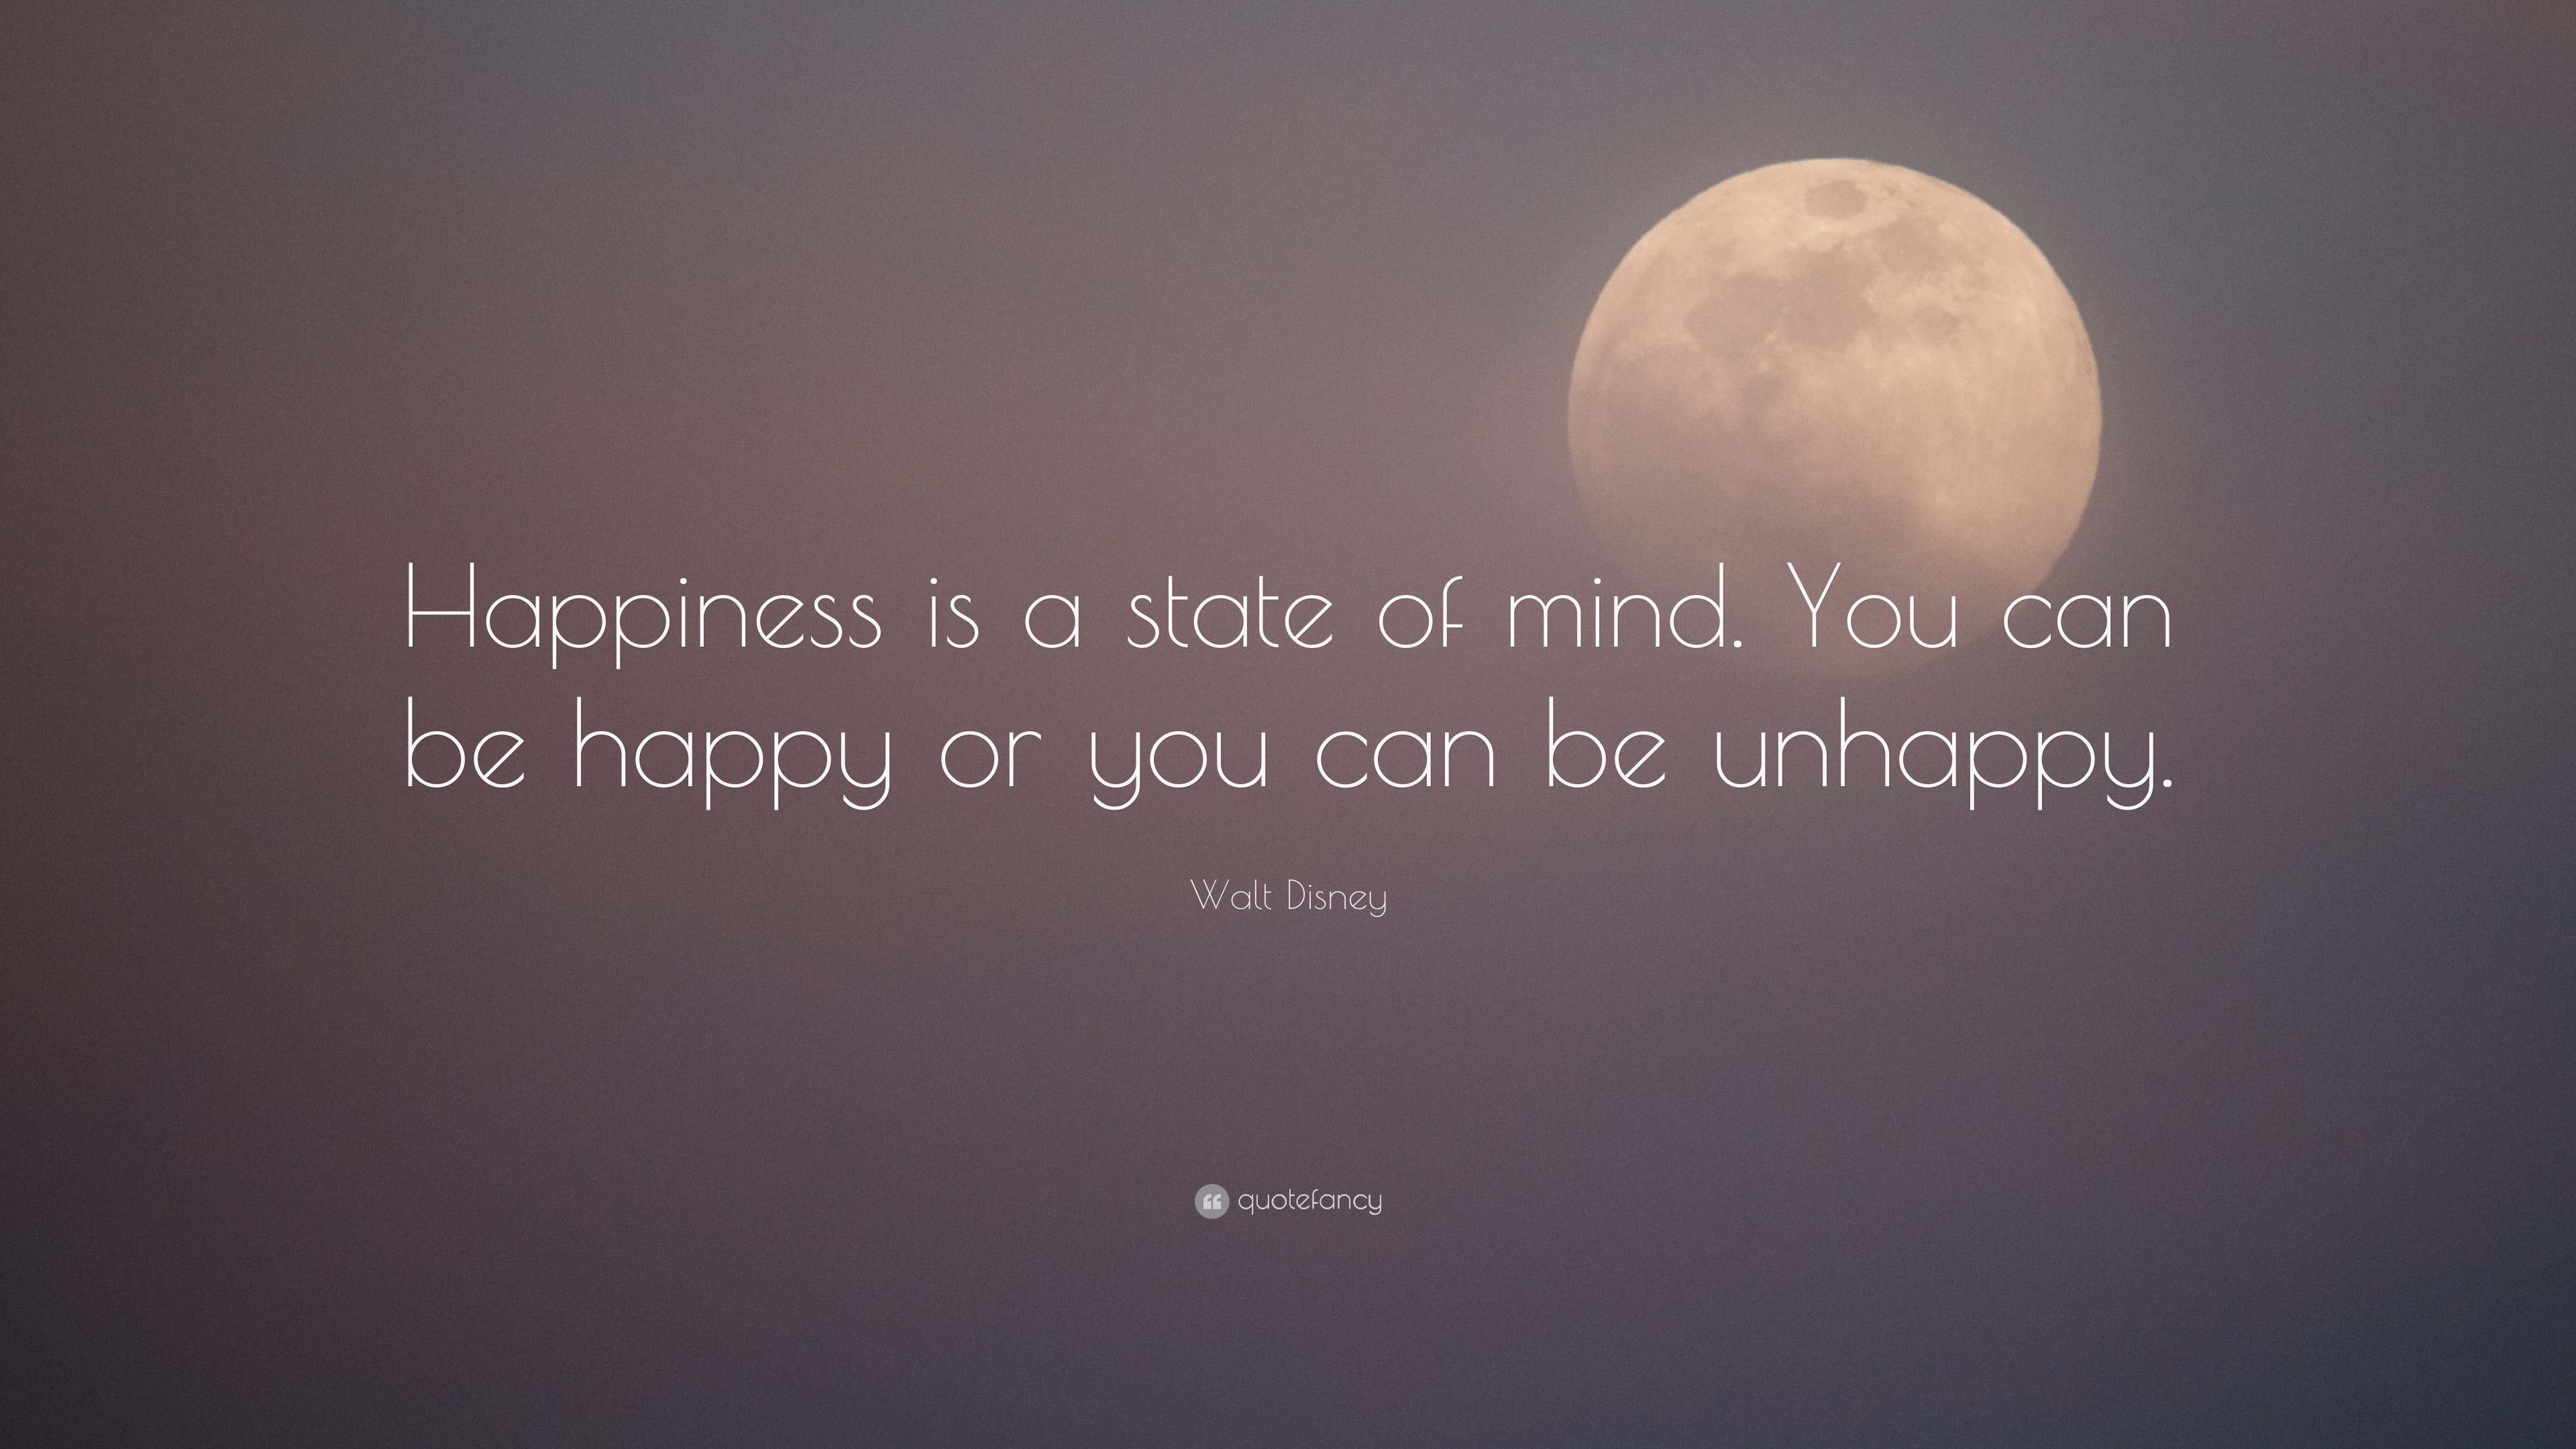  Walt  Disney  Quote  Happiness is a state of mind You can 